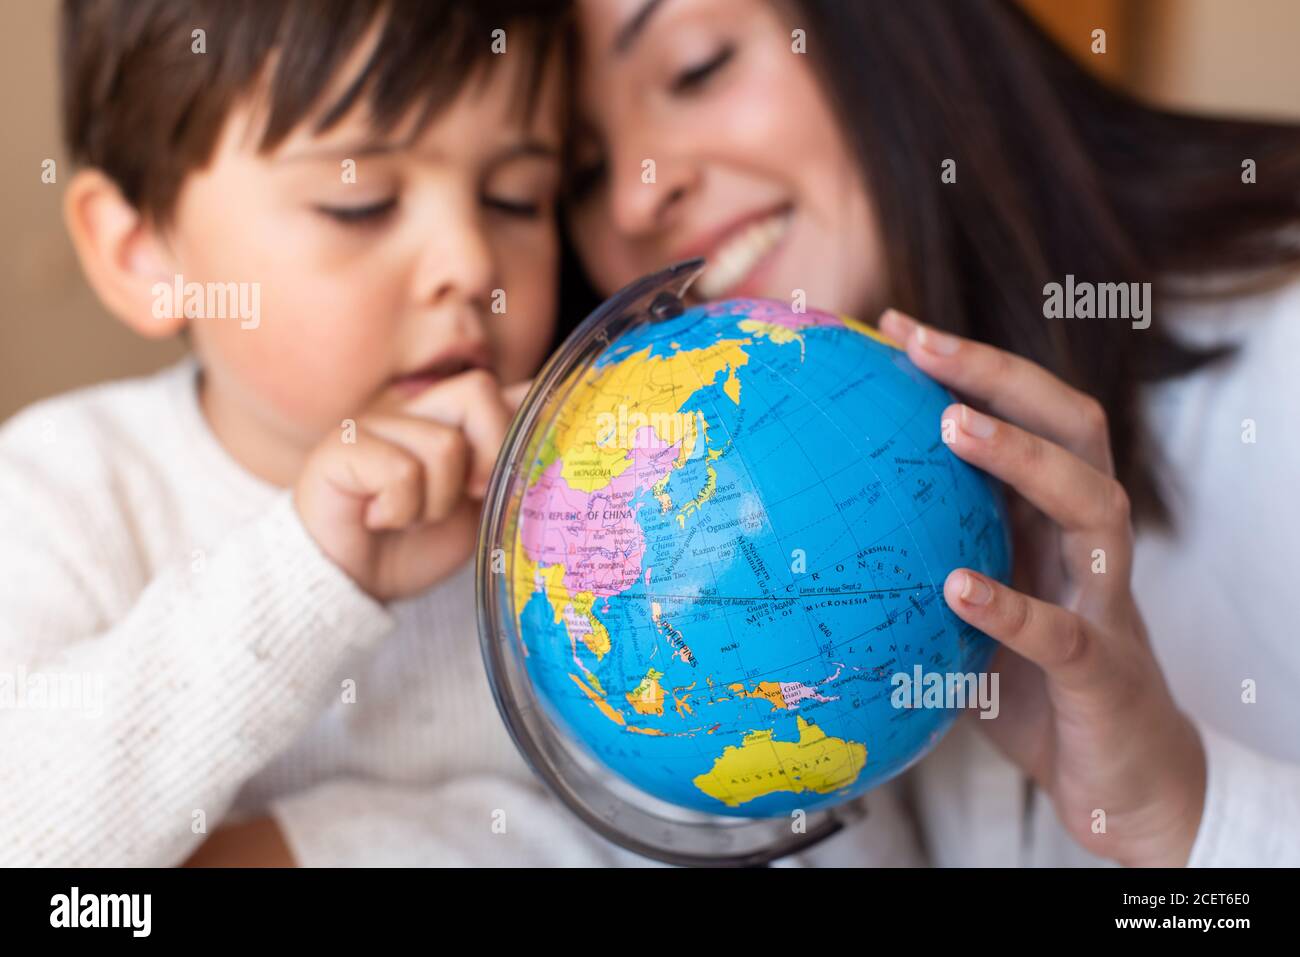 Liltle Preschooler Kid learing geography with a globe map and teacher educador help. Homeshooling. Learning Community. Montessori School Stock Photo